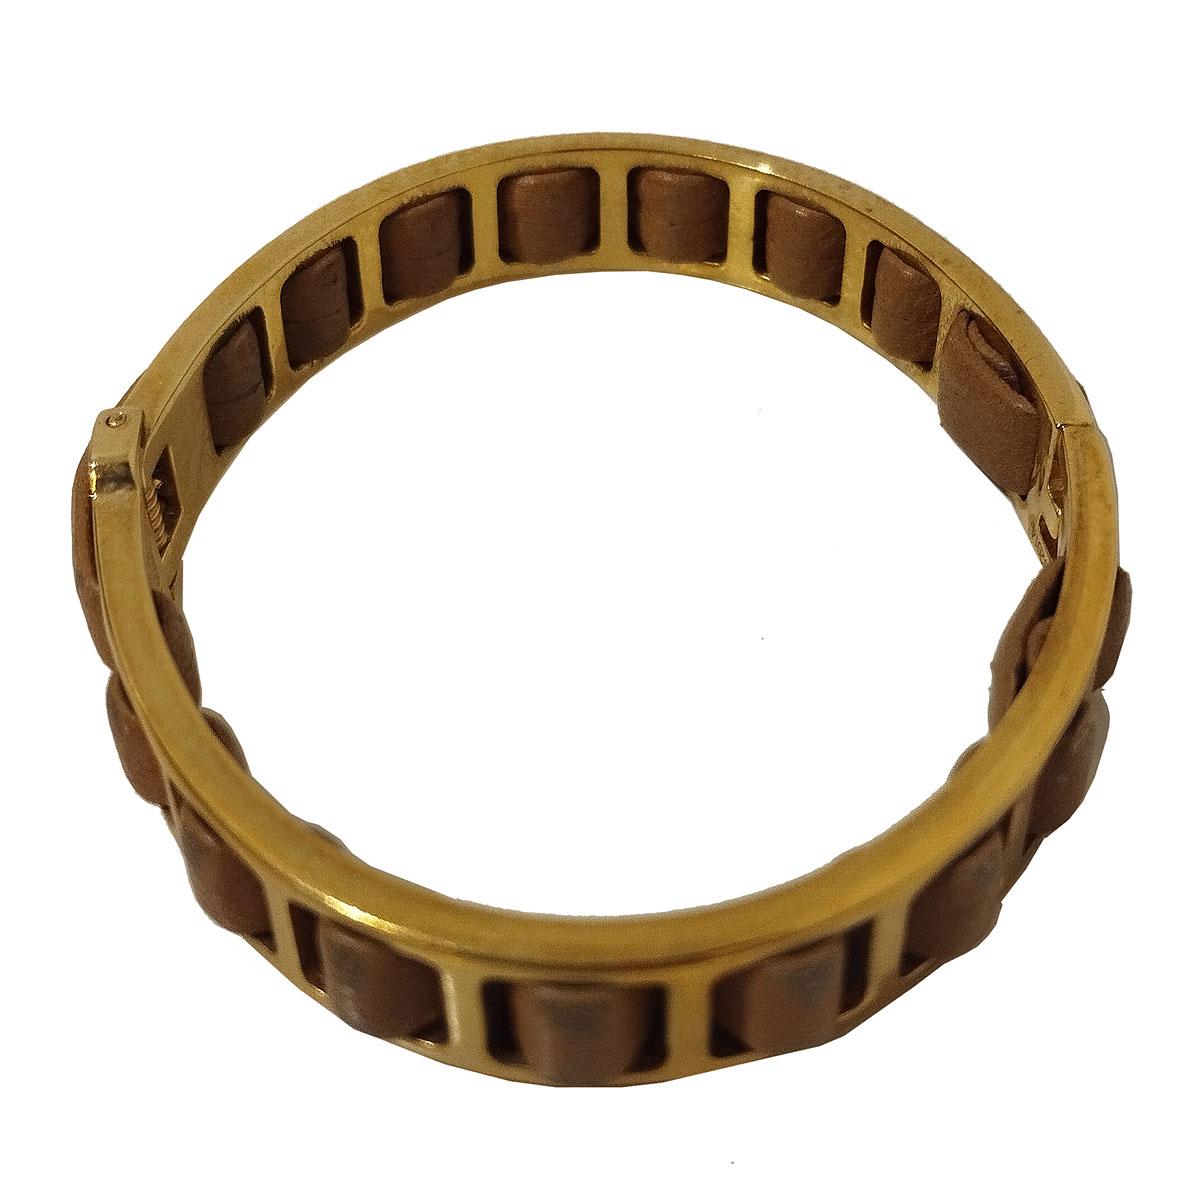 Very chic and iconic Fendi bracelet
Golden bracelet
Golden metal 
Cognac leather
FF Logo
Spring closure
Wrist size cm 15,5 (6,10 inches)
Used leather conditions
Worldwide express shipping included in the price 